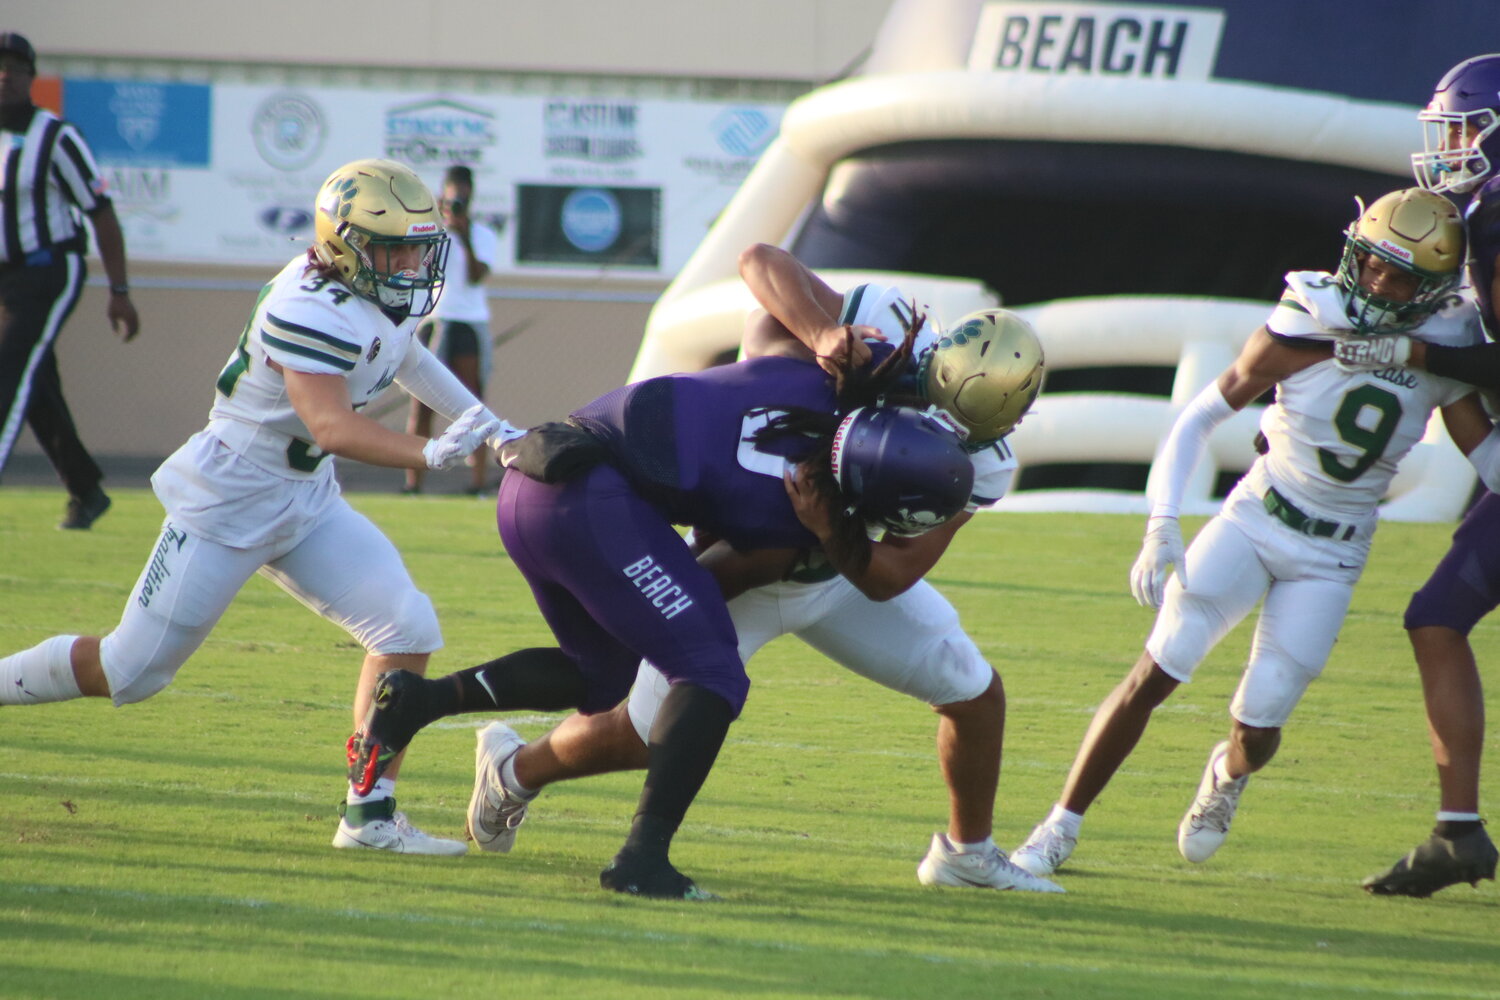 Noah Hellyer drags down a Fletcher ball carrier as the Panther defense swarms to the ball.